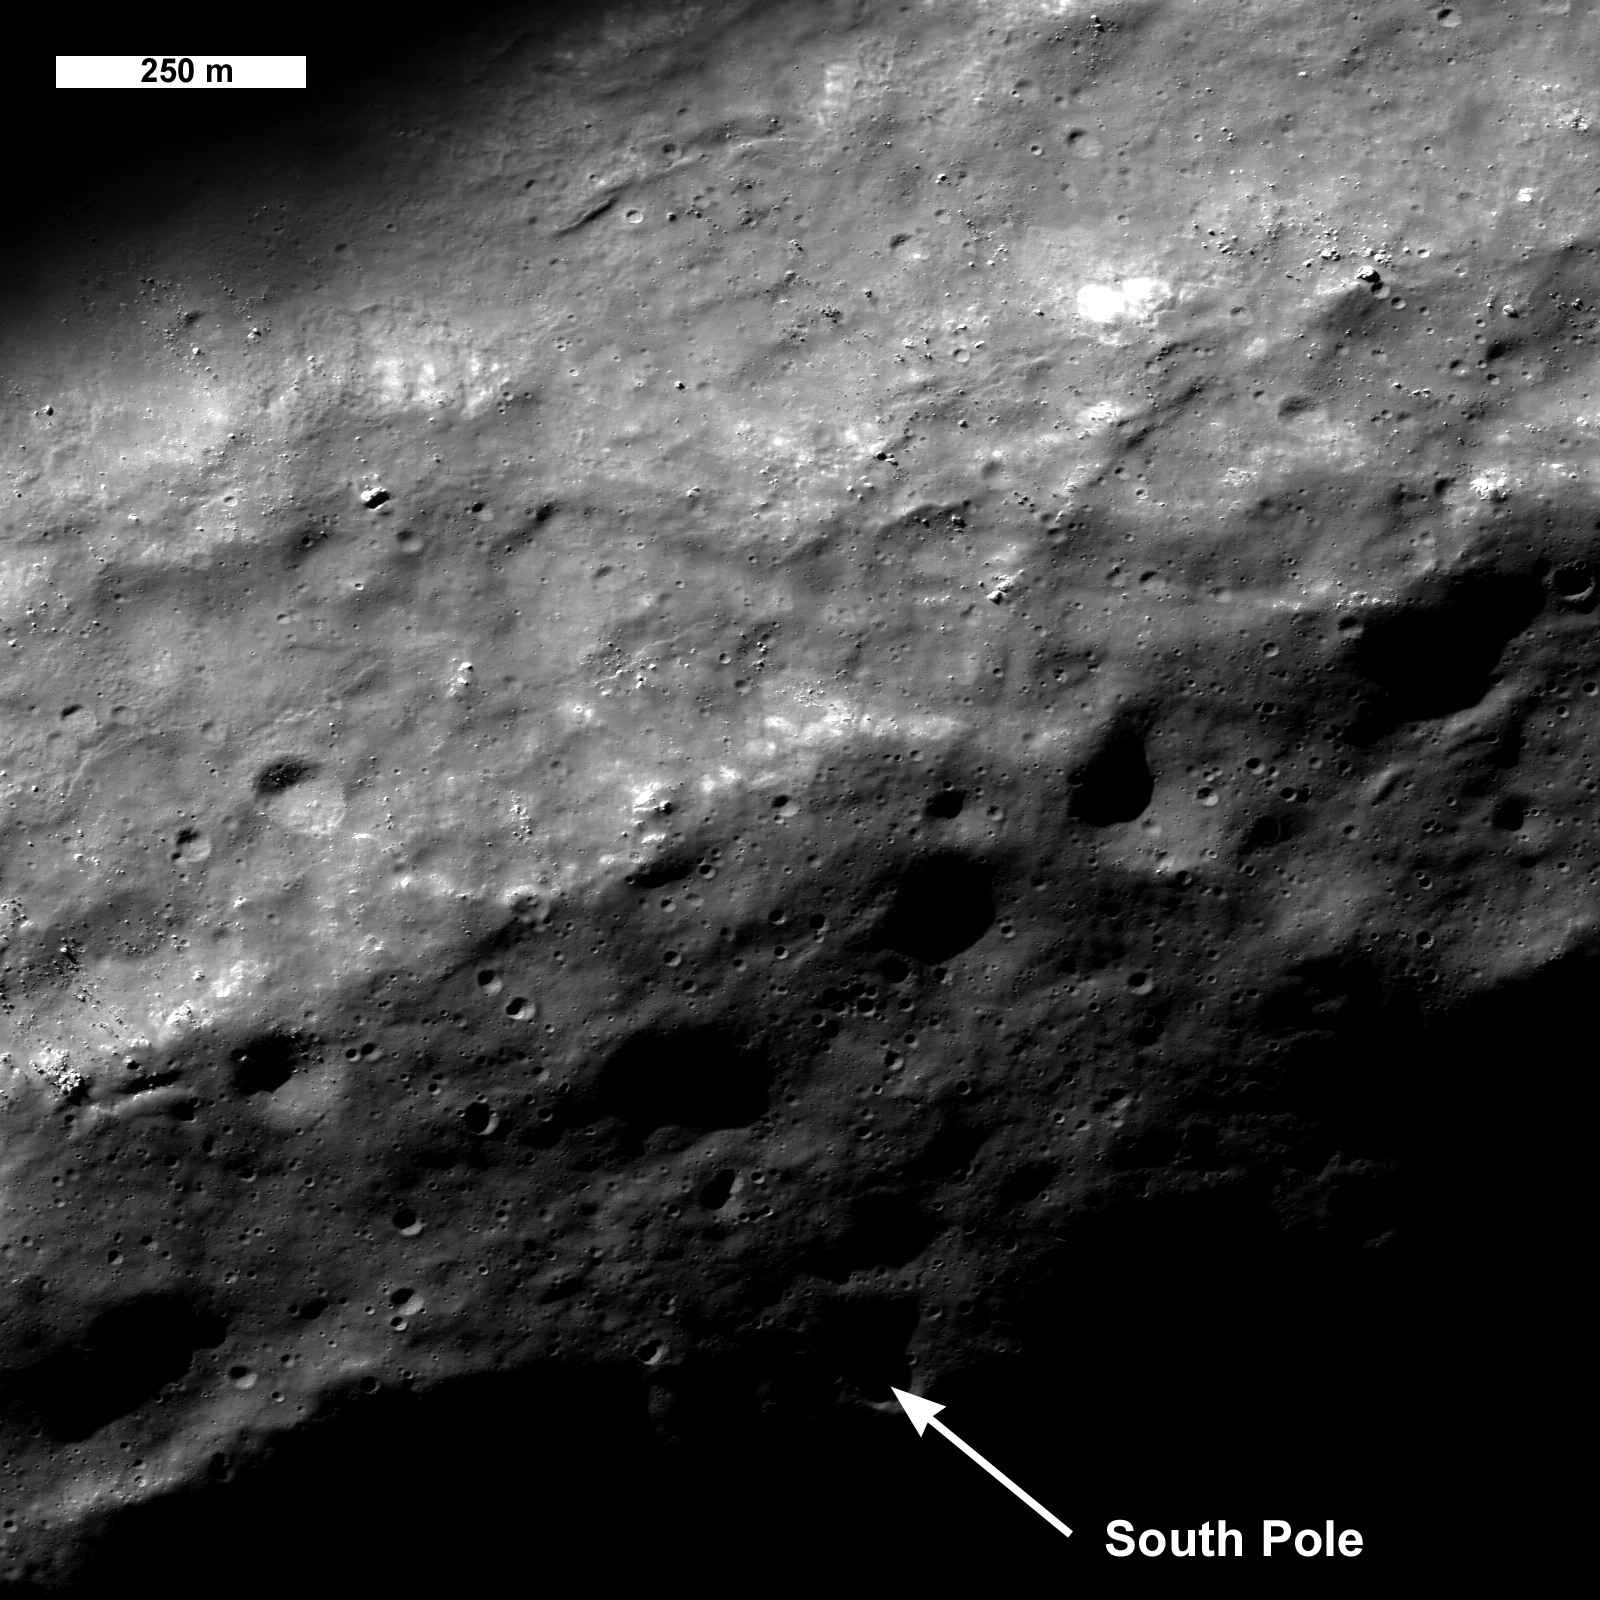 Lunar South Pole - Out of the Shadows